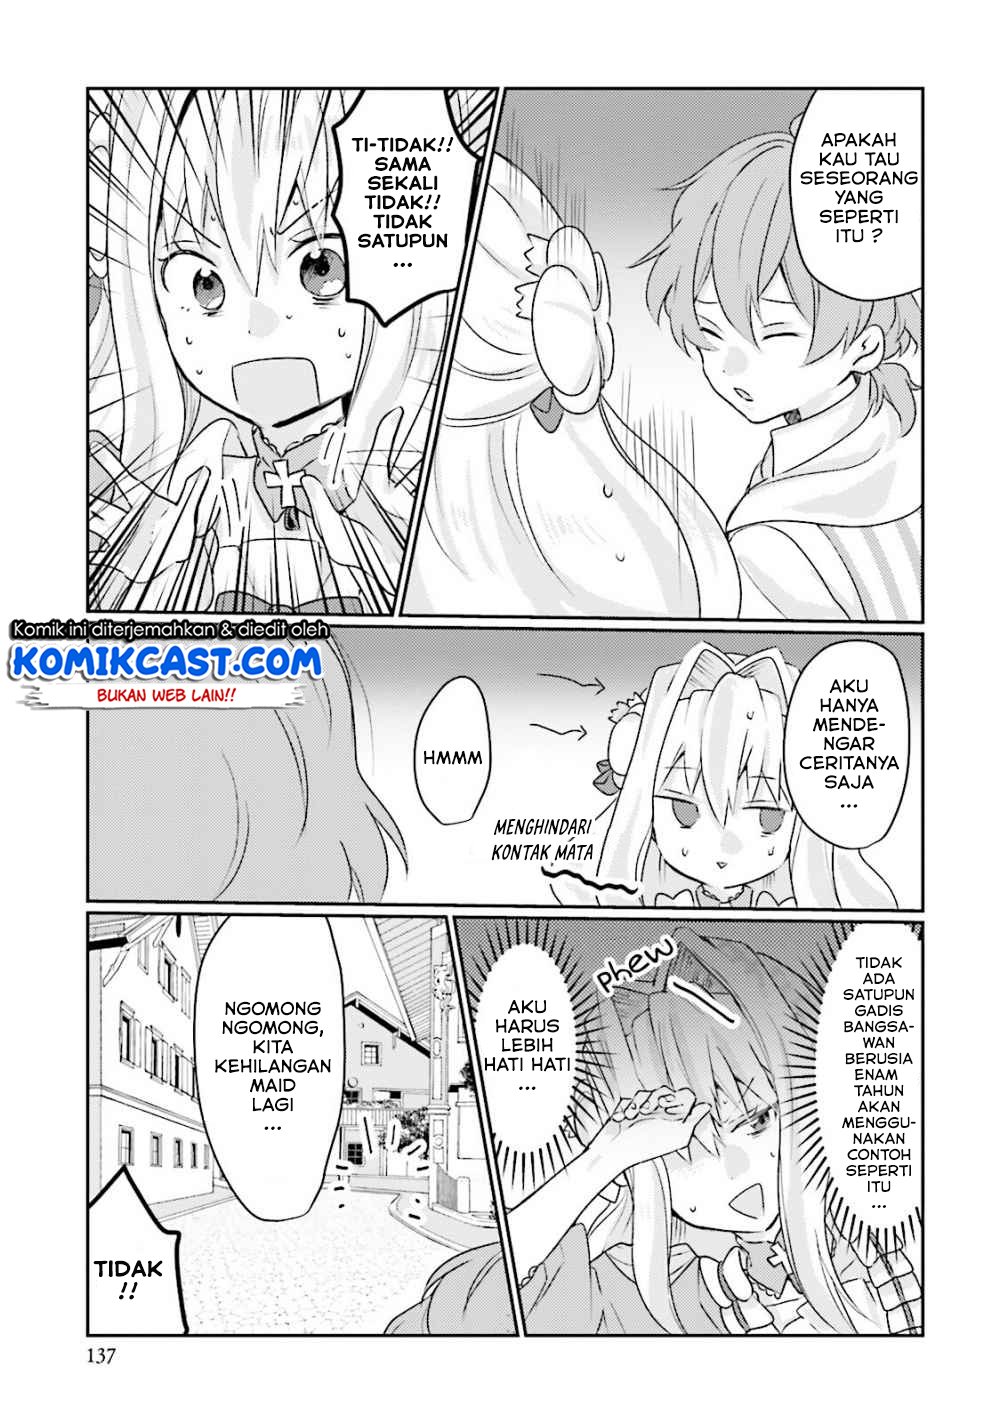 Baca The Villainess Wants to Marry a Commoner!! Chapter 4.2  - GudangKomik